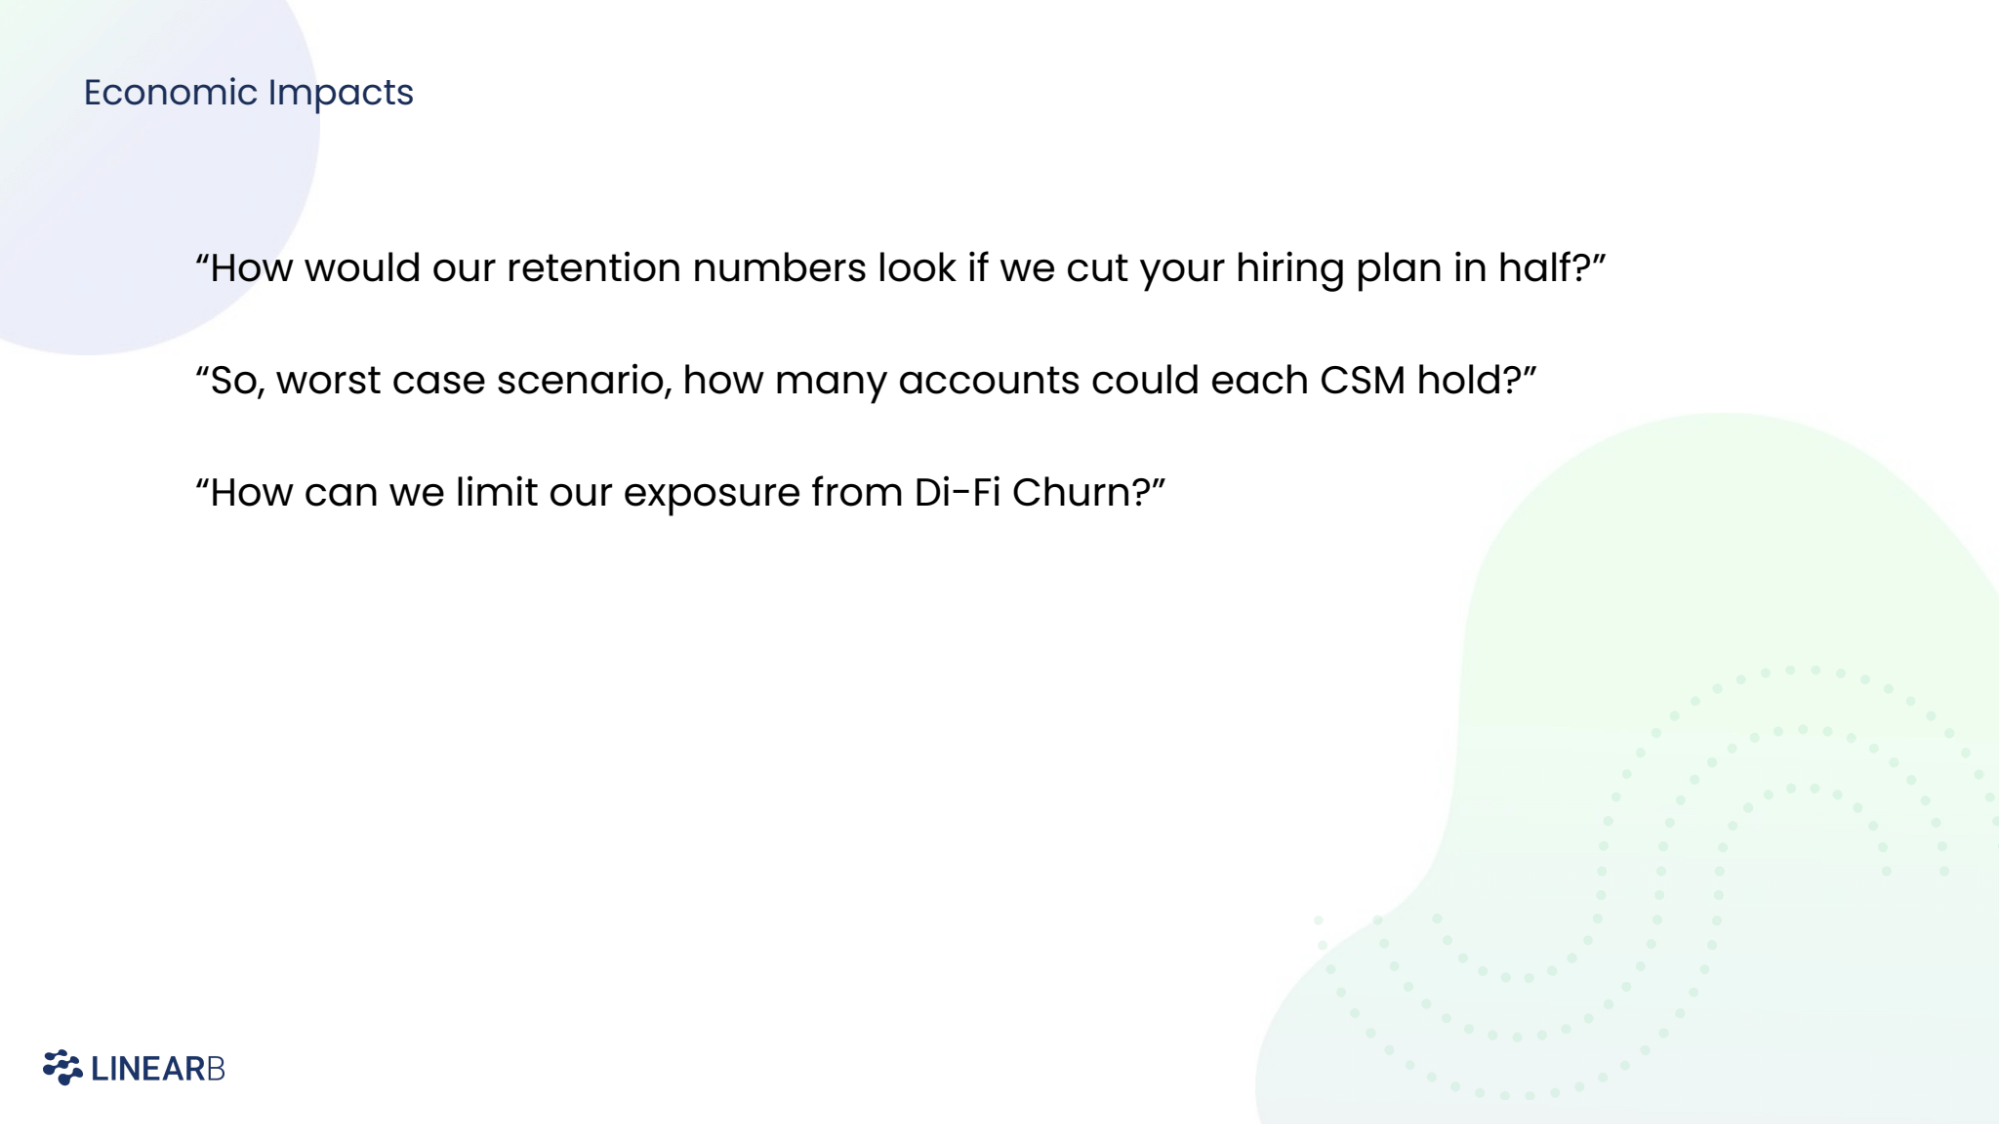 Economic impacts: "How would our retention numbers look if we cut your hiring plan in half?" "So, worst-case scenario, how many accounts does each CSM hold?" "How can we limit our exposure from Di-Fi Churn?"